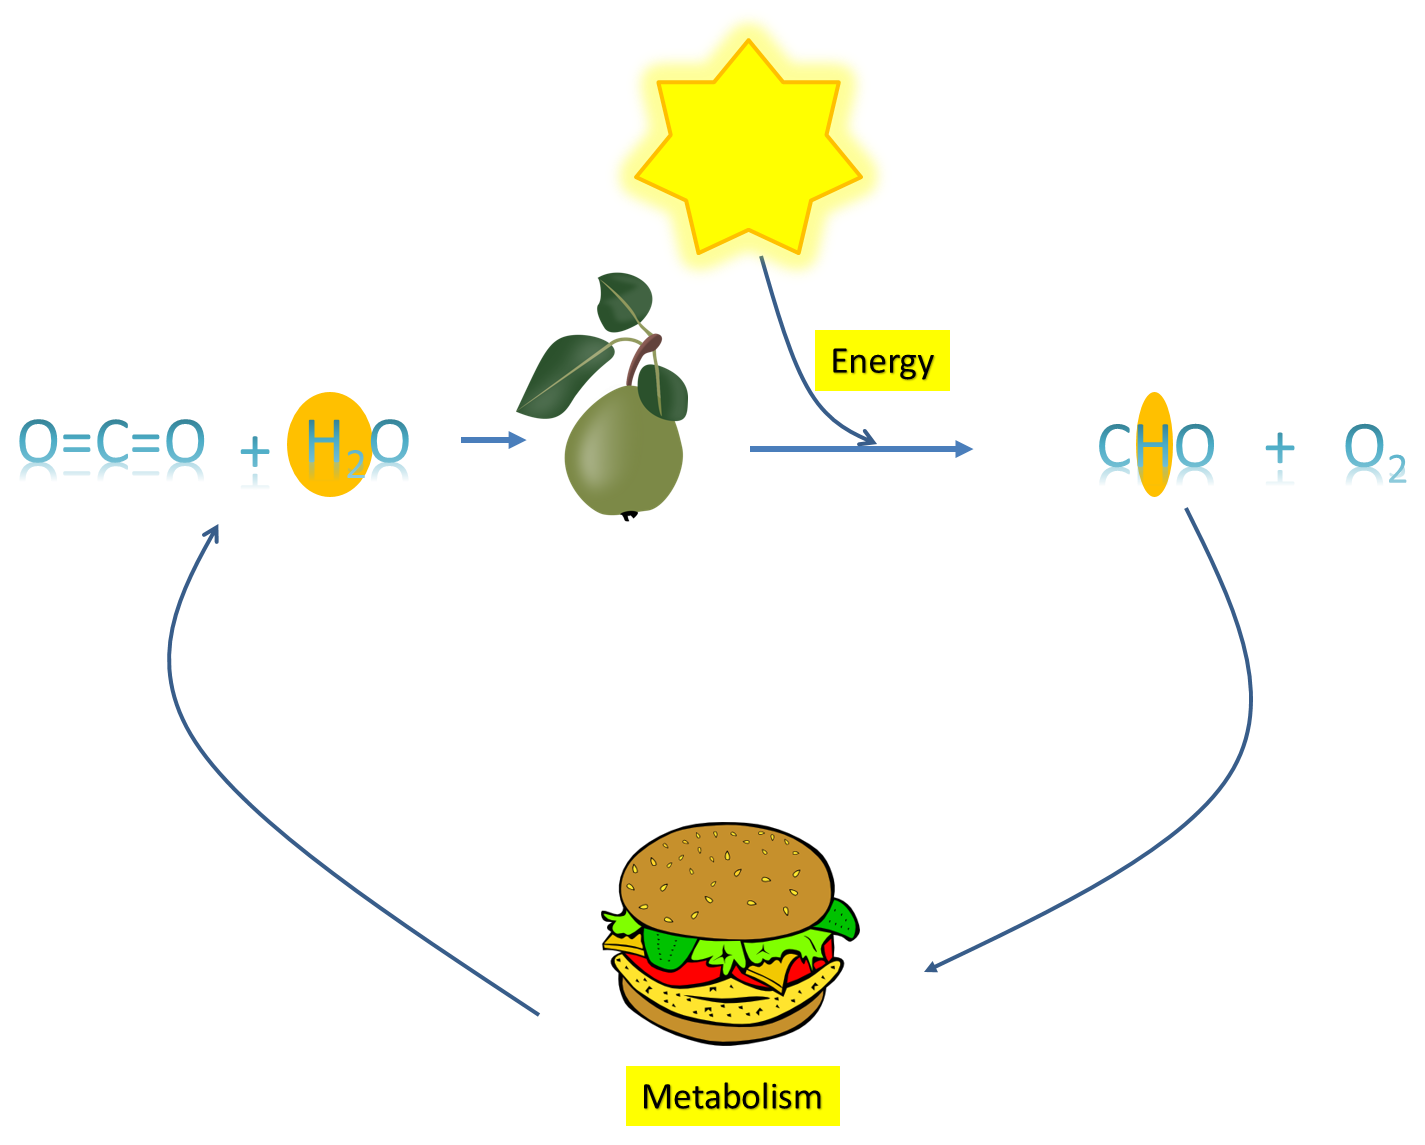 graphical representation of the energy cycle